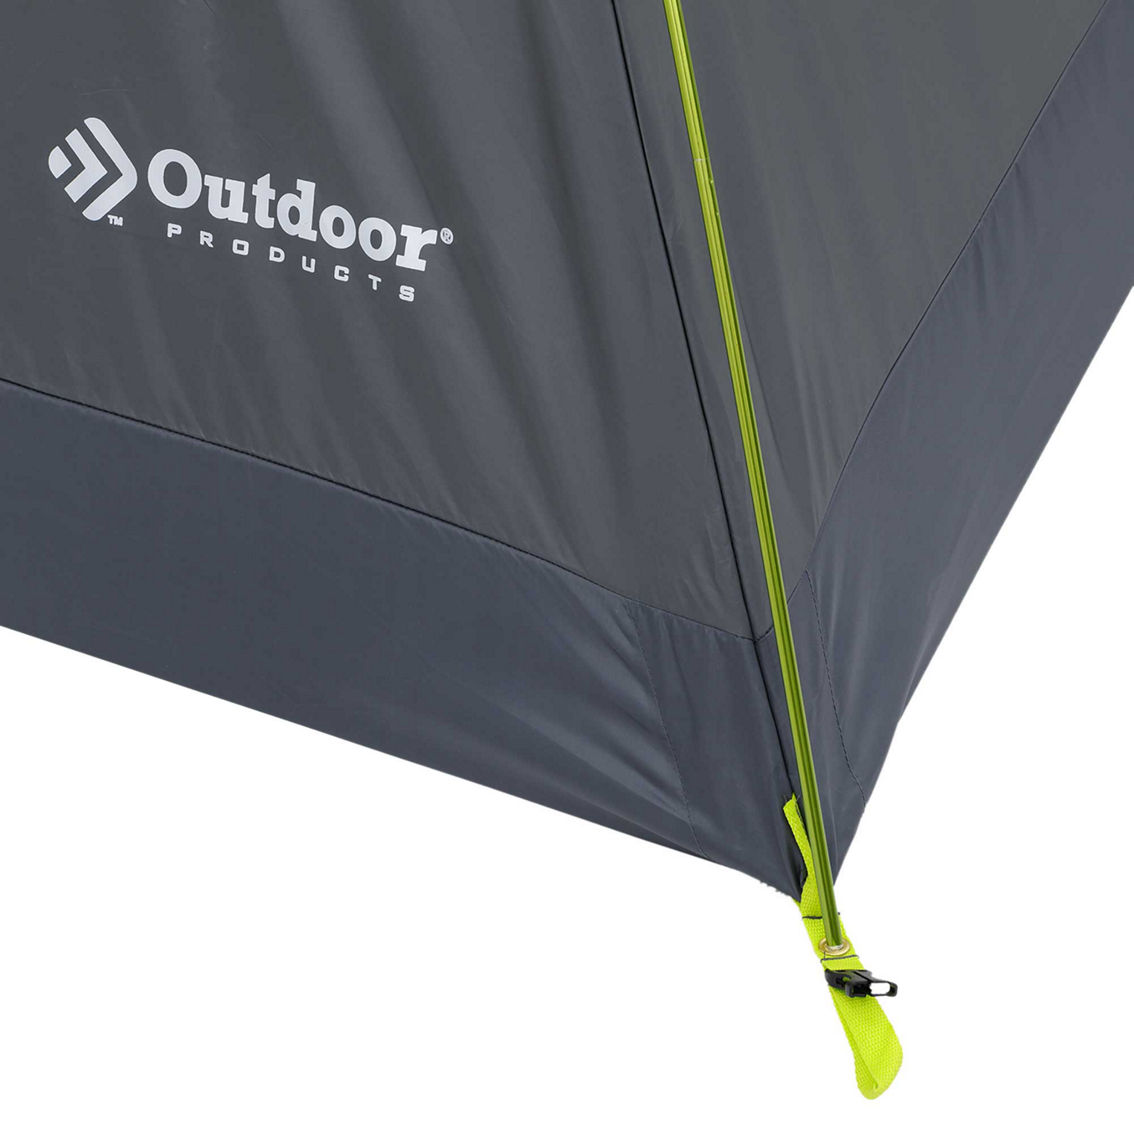 Outdoor Products 4P Backpacking Tent w/ 2 Vestibules - Image 5 of 9